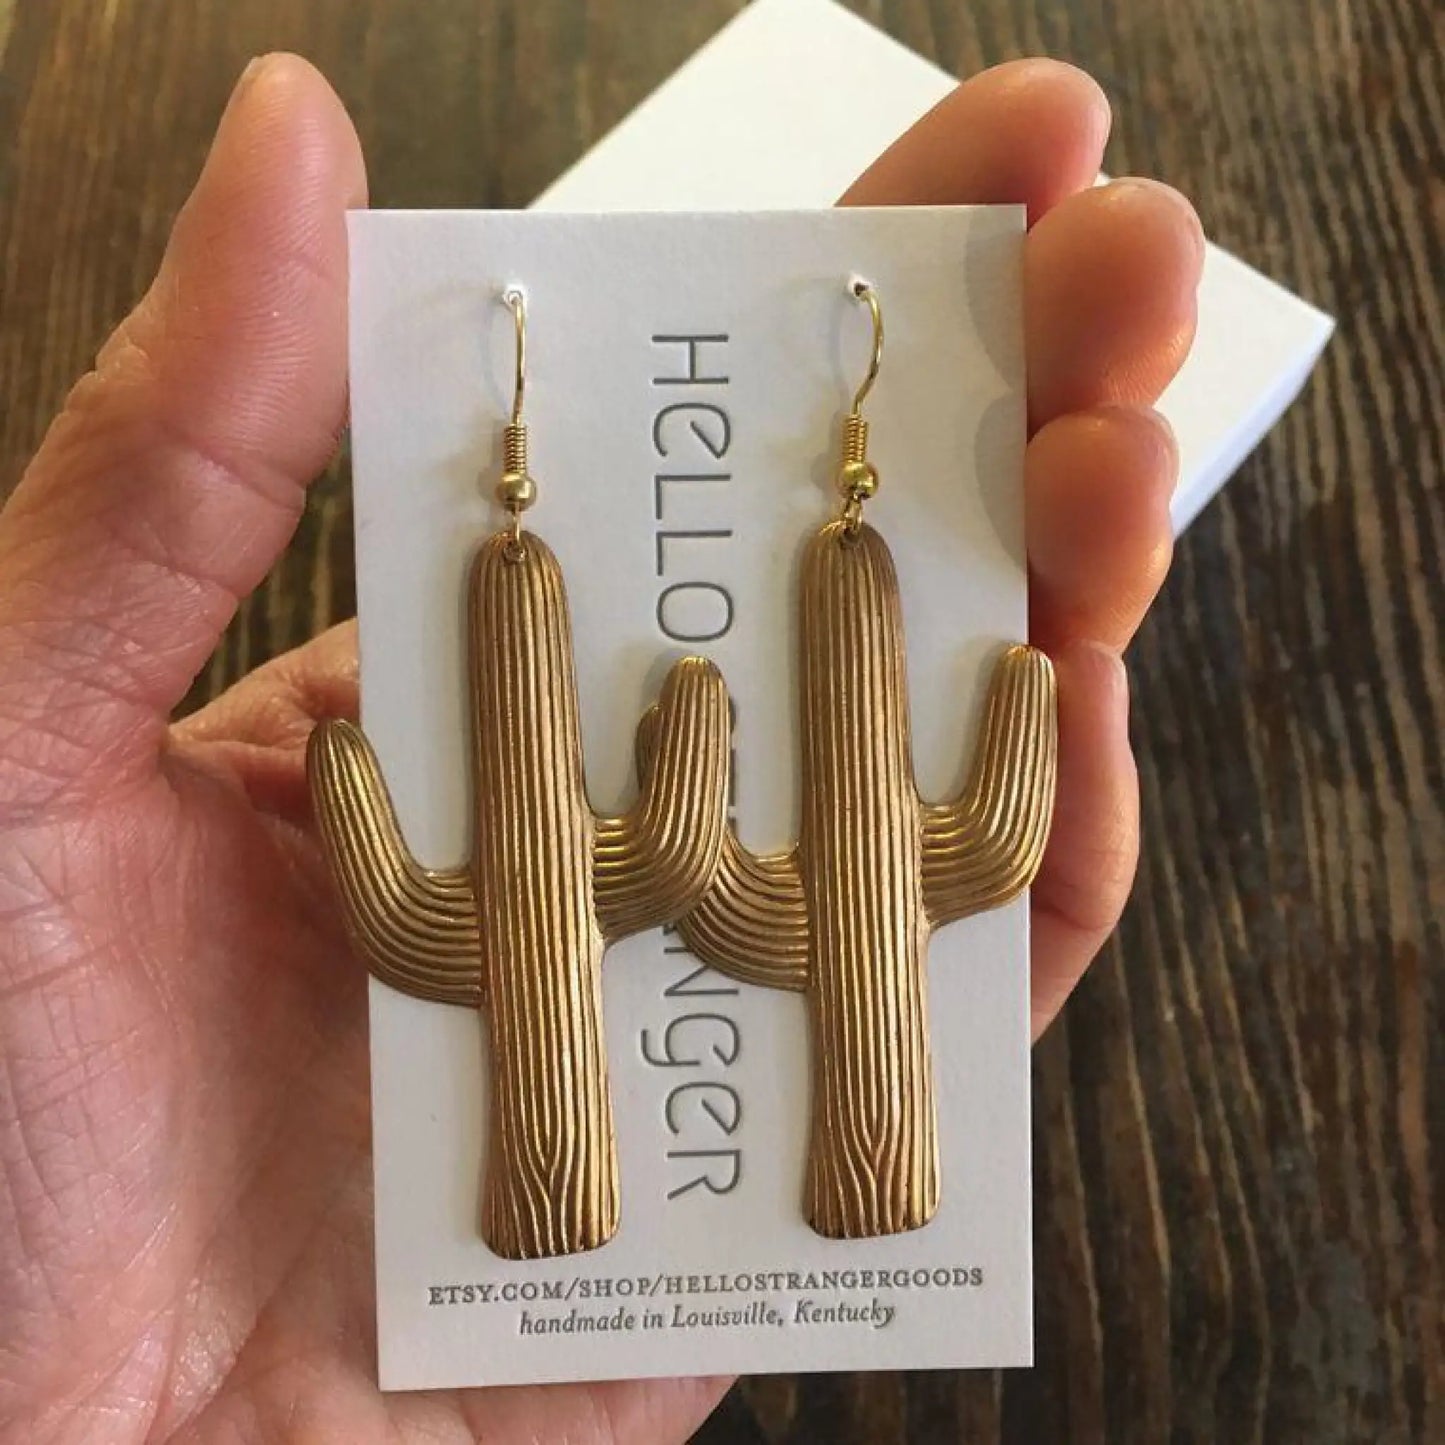 Cactus Affinity - Giant Silver Cactus Earrings